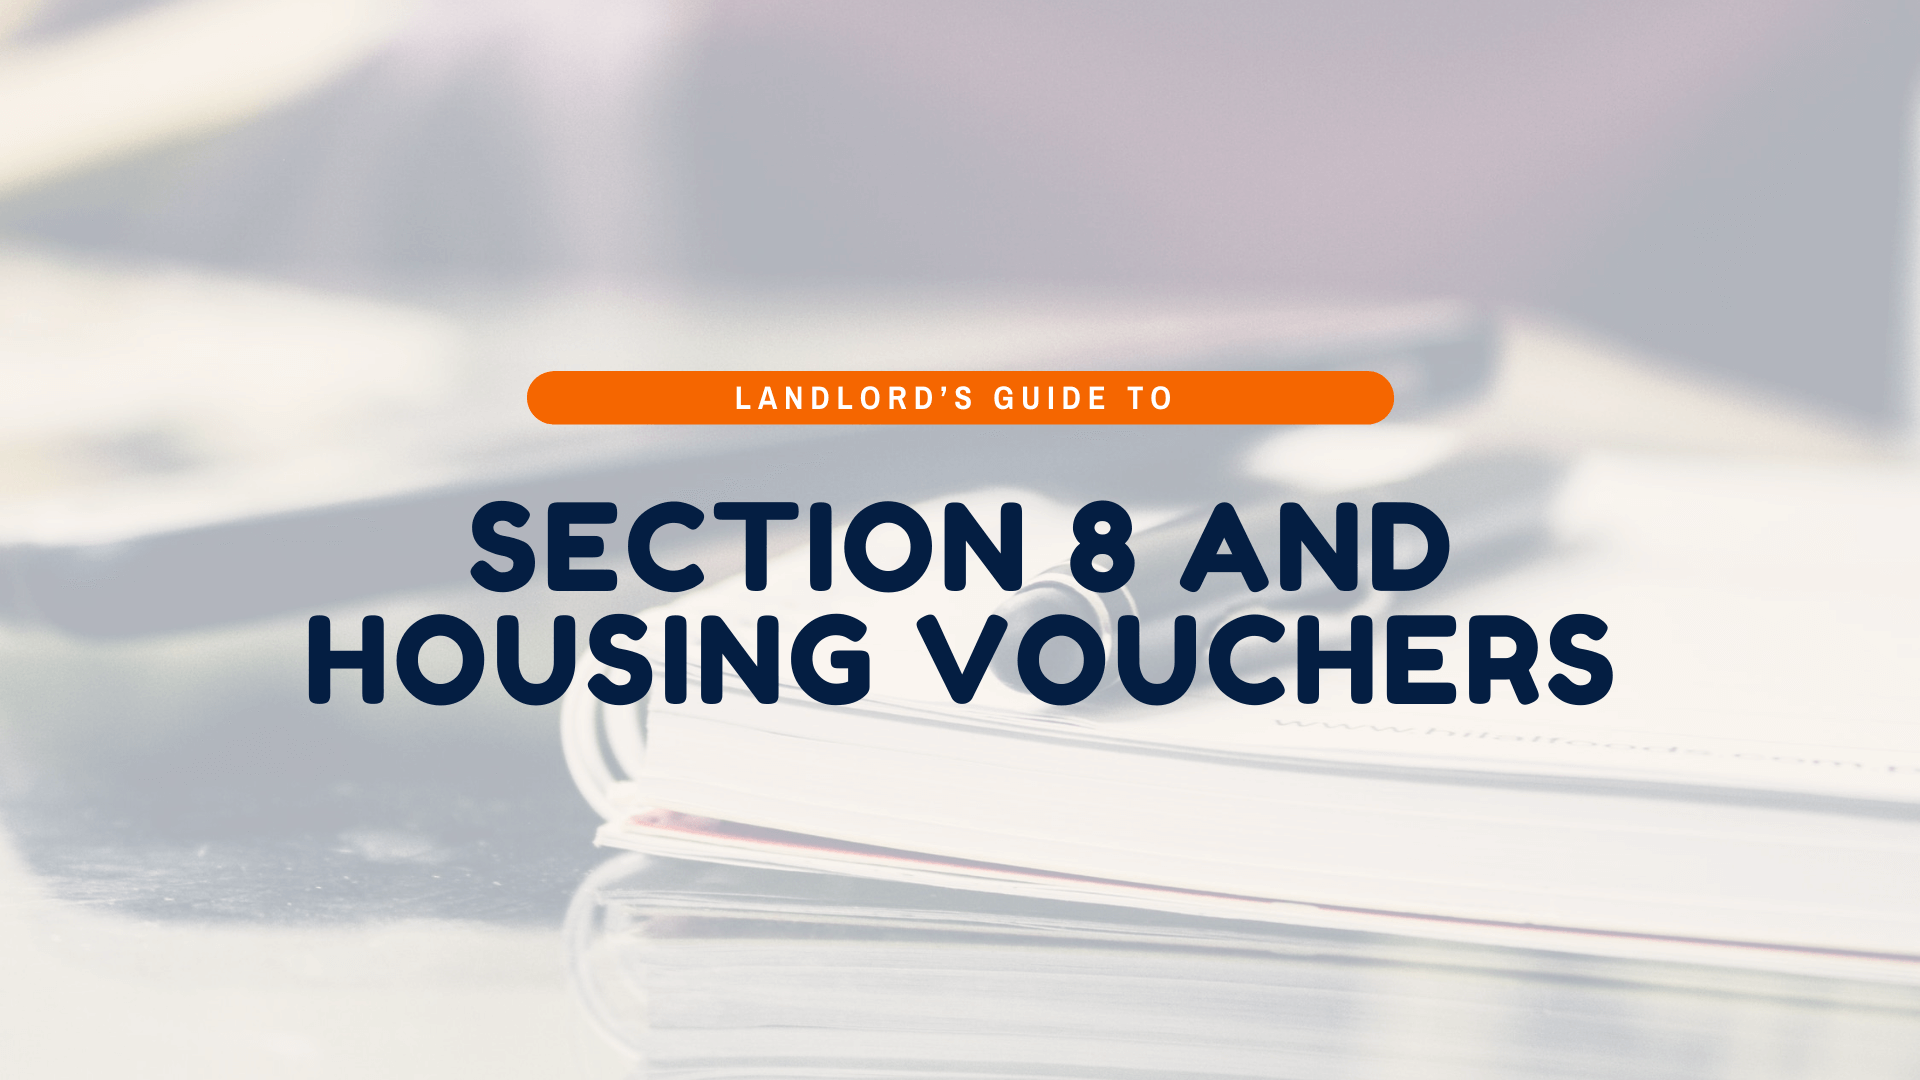 Landlord’s Guide to Section 8 and Housing Vouchers in San Diego - article banner